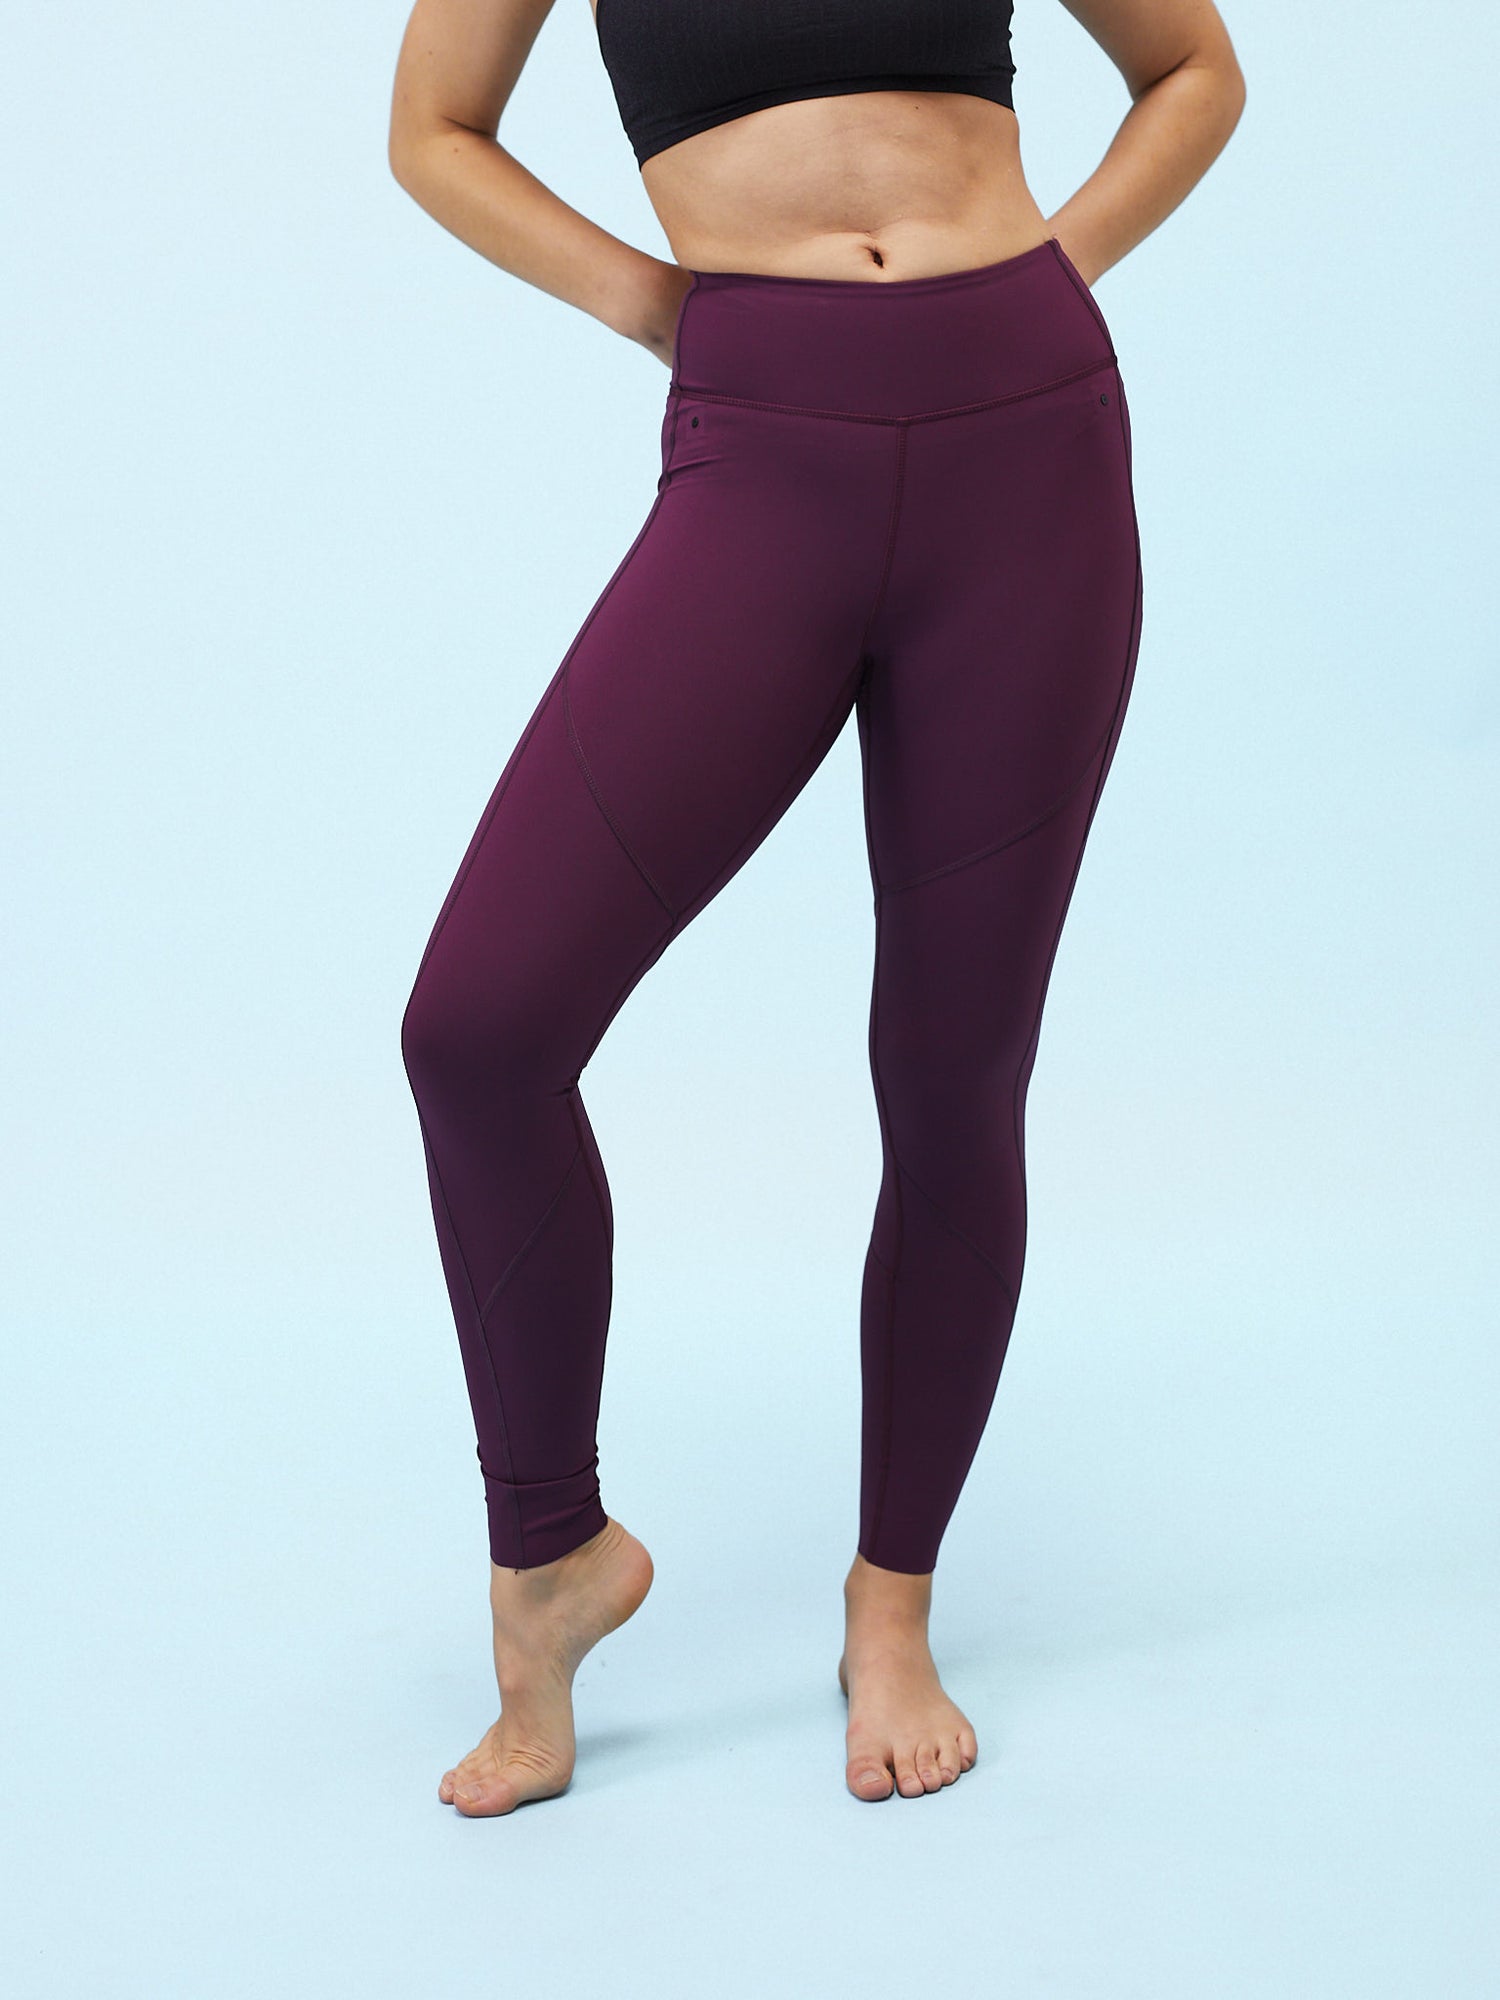 In a Democracy, All Yoga Pants are Not Equal | The Cosmic Grape